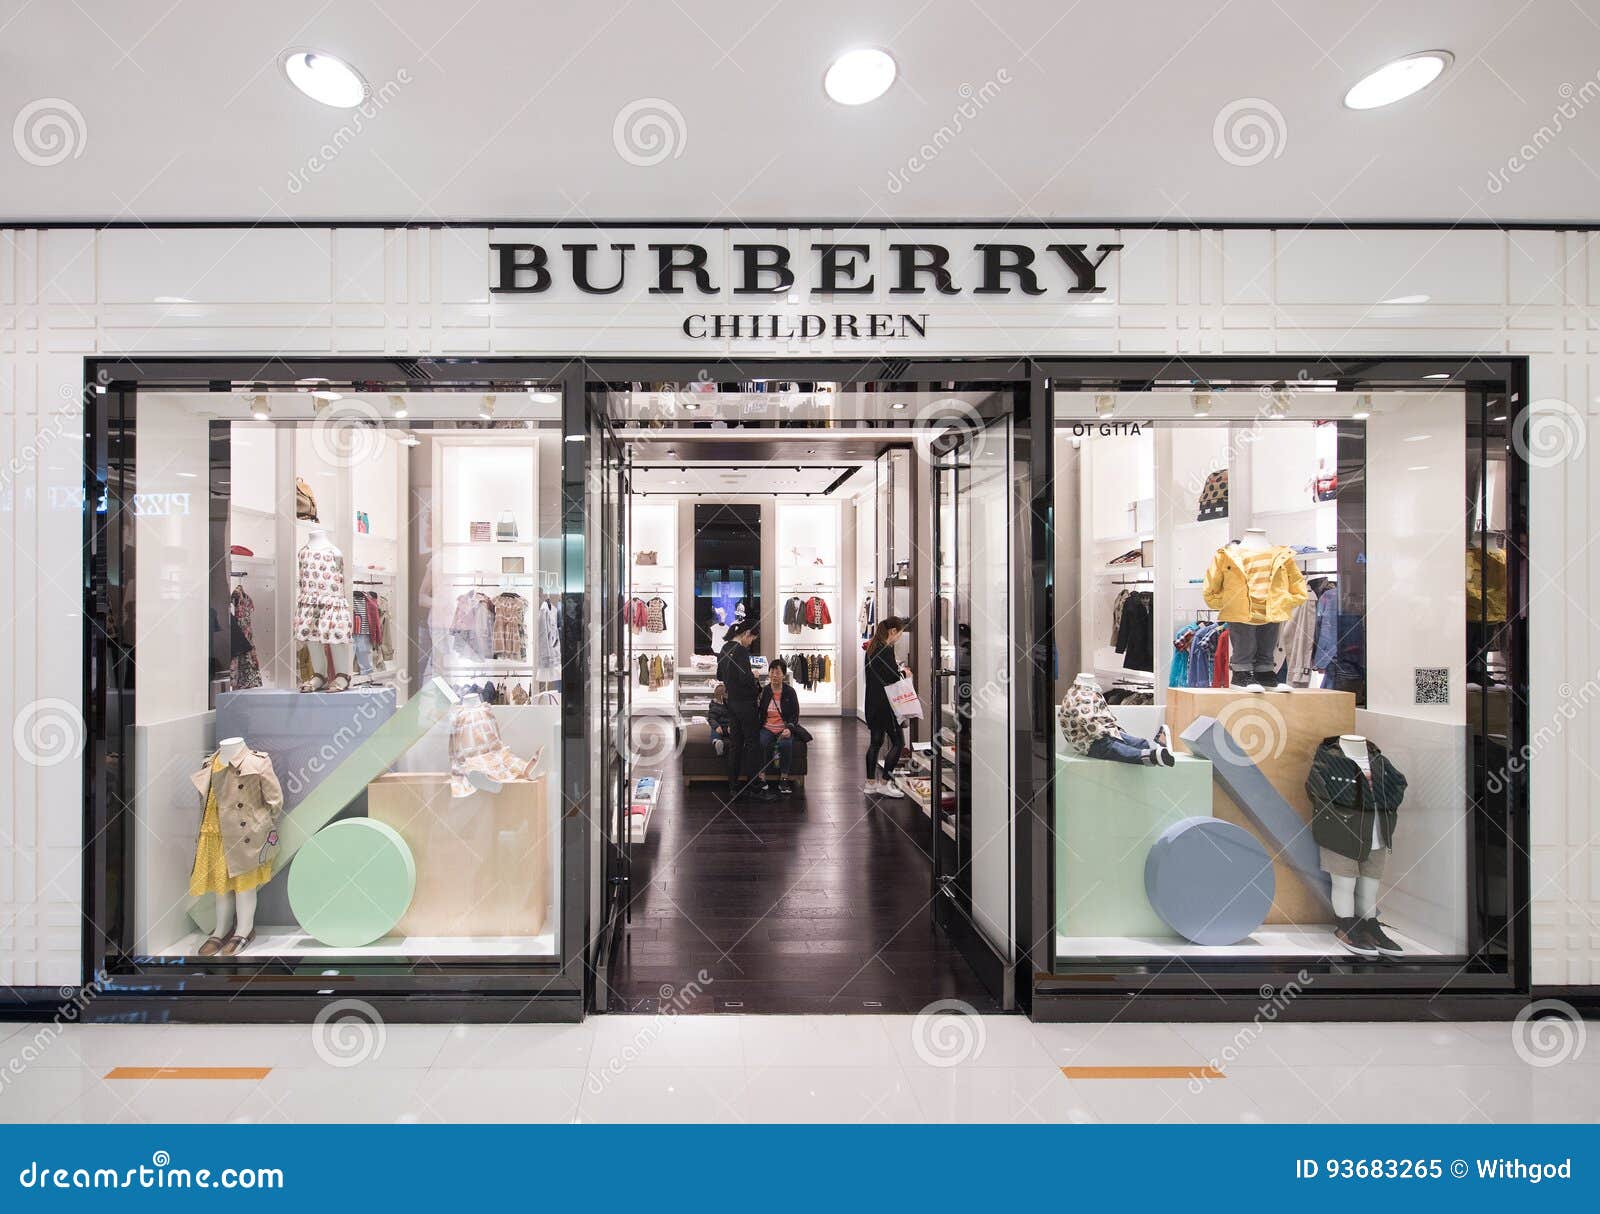 burberry clothing store